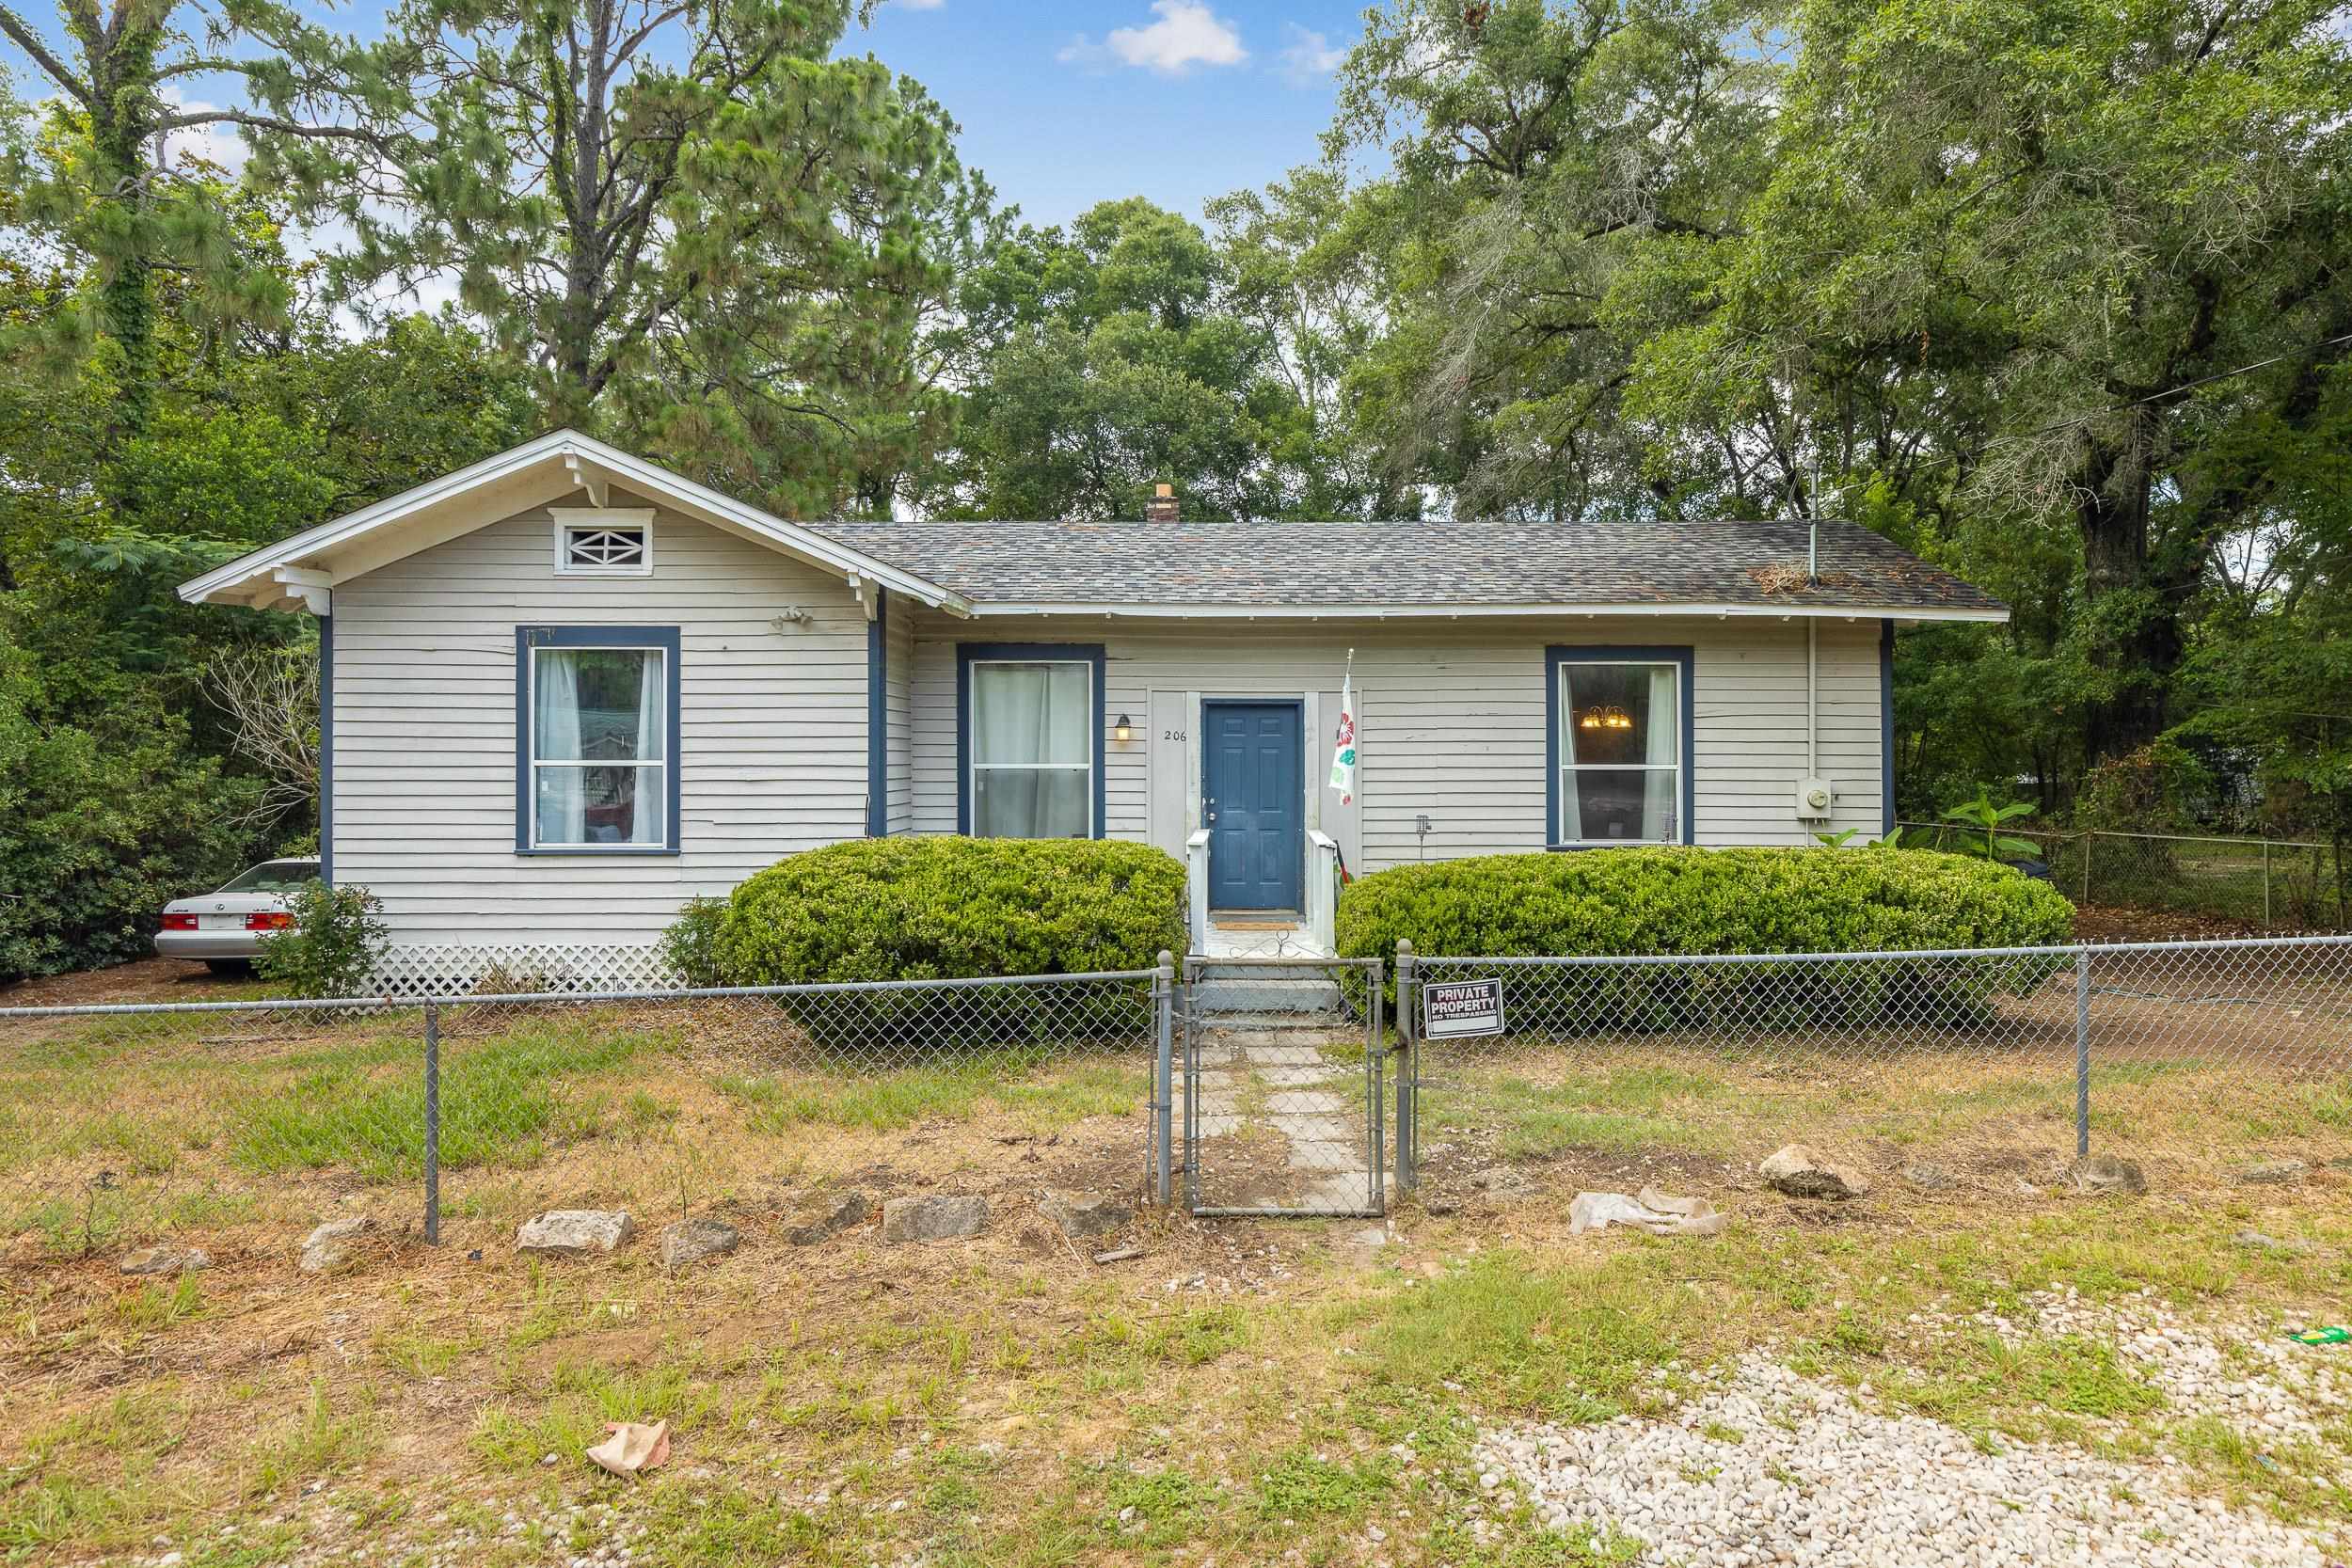 This spacious 3 bedroom 2 bathroom is a well maintained home with many updates. The roof, tankless water heater, and washer and dryer were replaced in 2018. All stainless steel kitchen appliances and HVAC were replaced in 2021. This home has a fully fenced yard and a side deck that is great for entertaining!